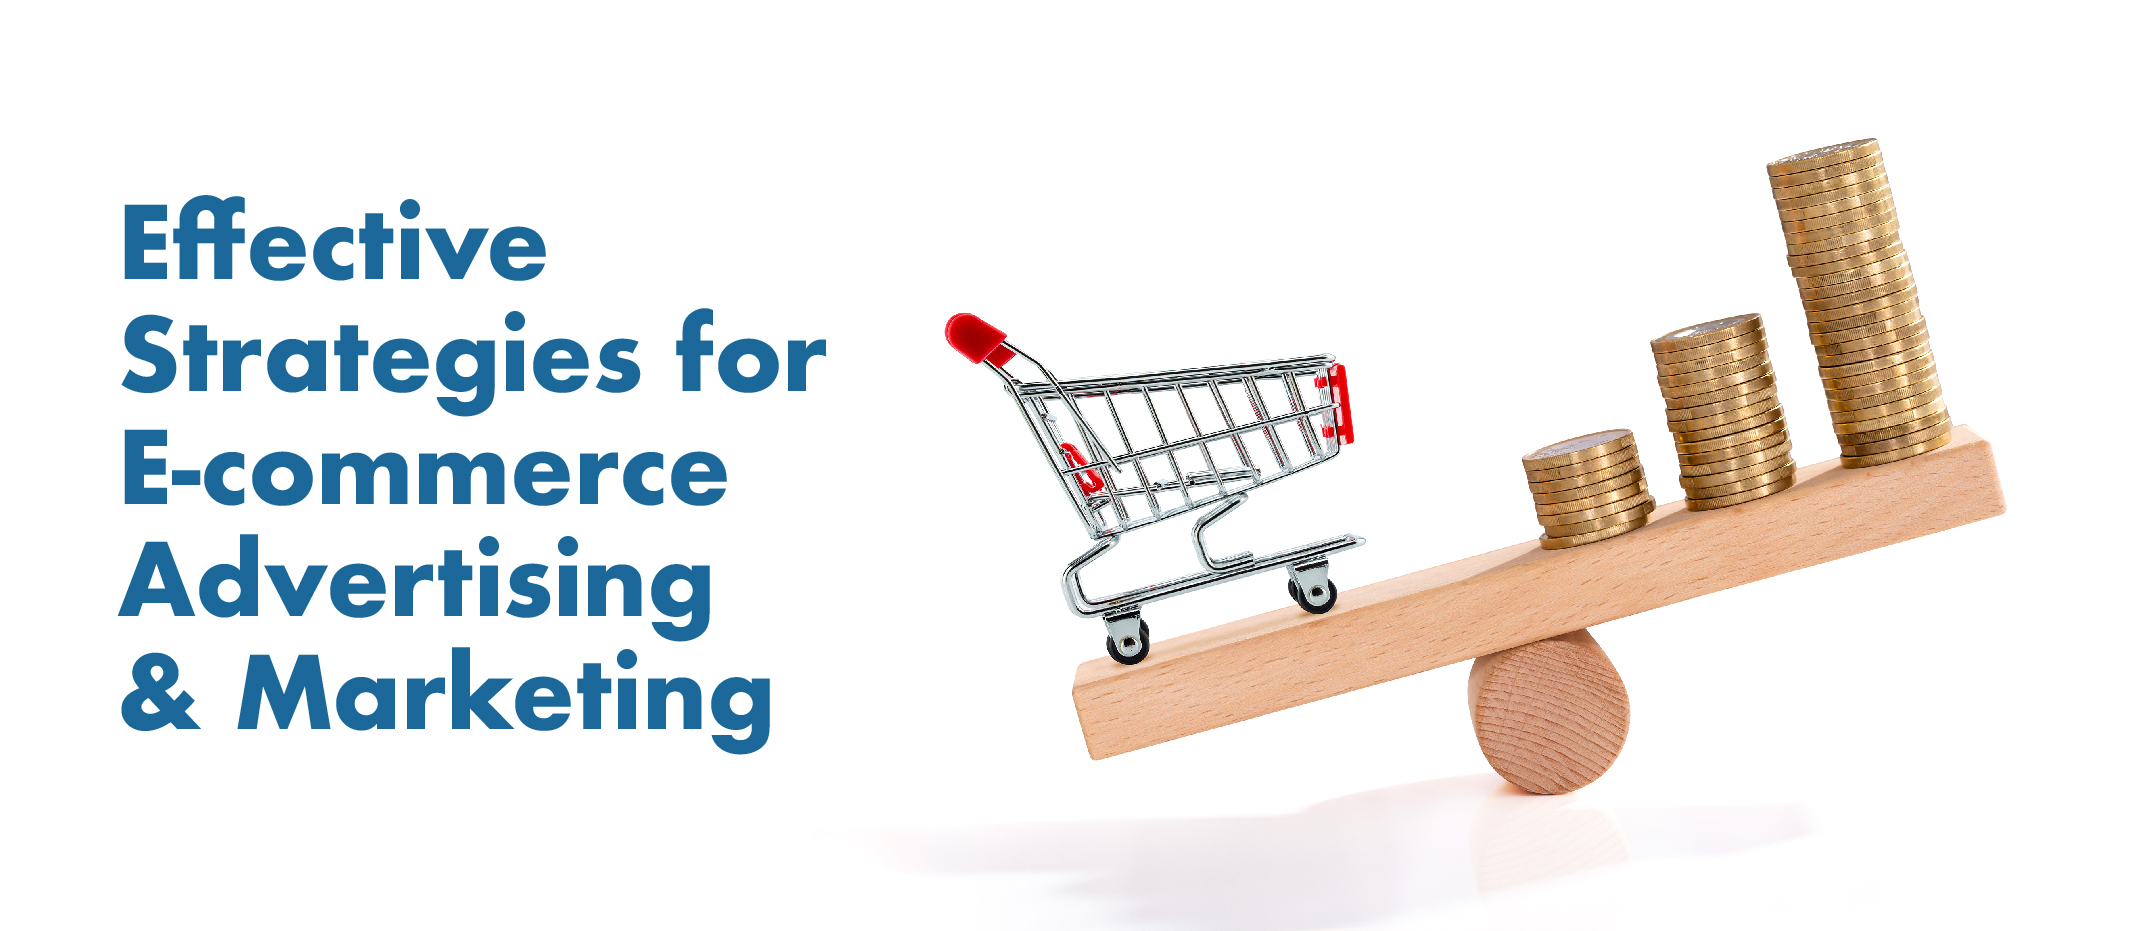 Effective strategies for e-commerce advertising and marketing